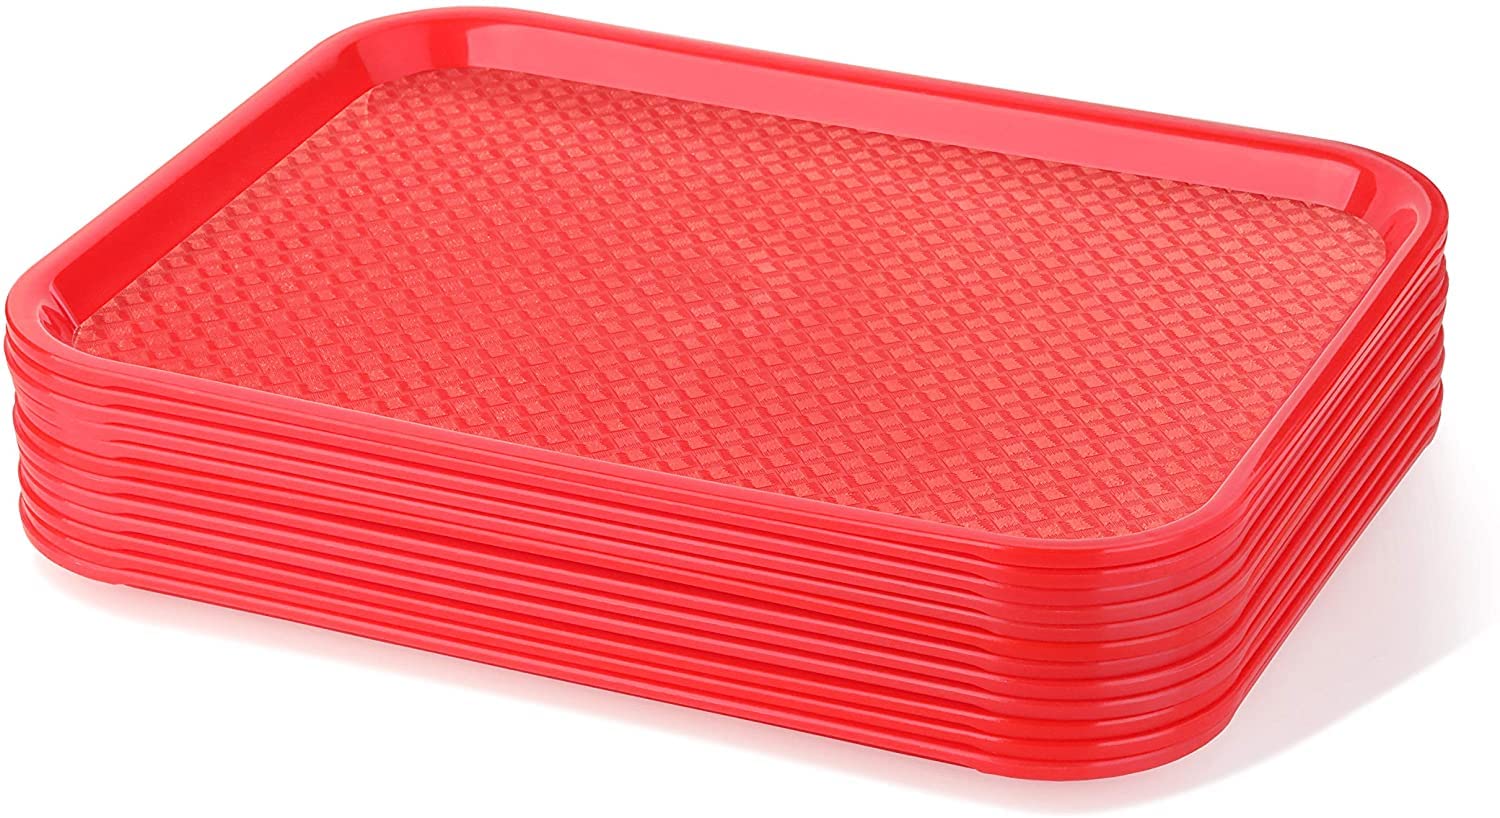 NJ Plastic Serving Platter Large Tray Unbreakable Snacks Tea Serving Tray Red Drink Breakfast Tea Dinner Coffee Salad Food for Dinning Table Home Kitchen (16 X 12 Inches) : Red 12 Pcs.